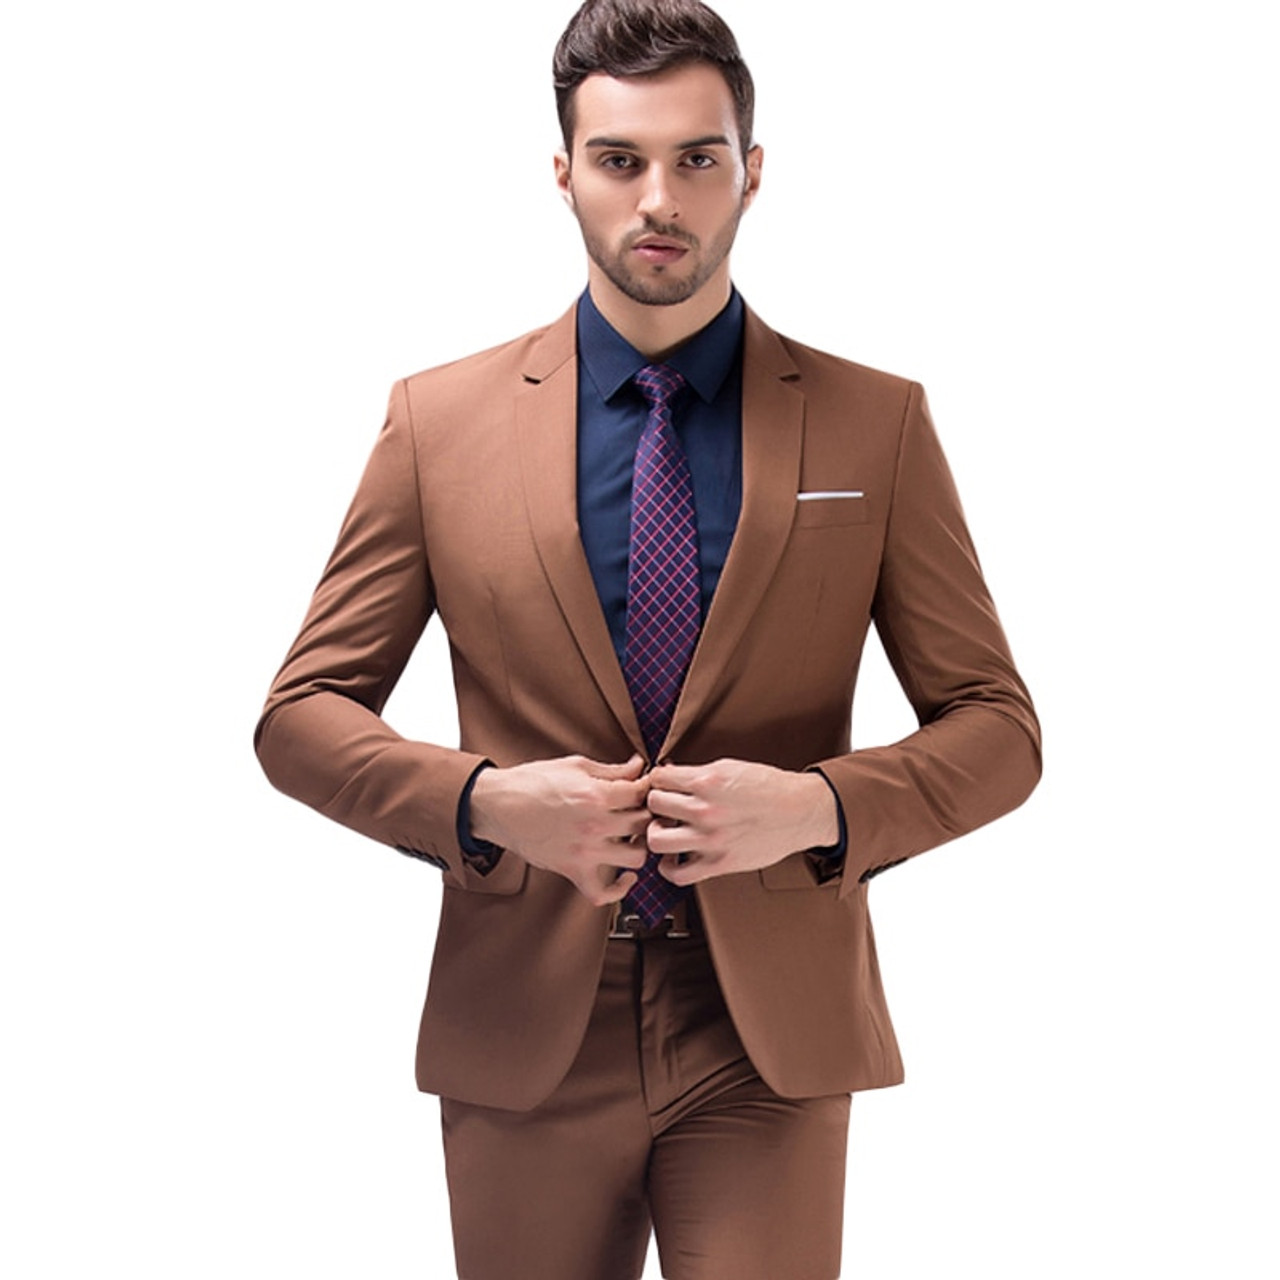 Black And Brown Are The Ultimate Neutrals - Here's How To Pair Them For The  Perfect Look